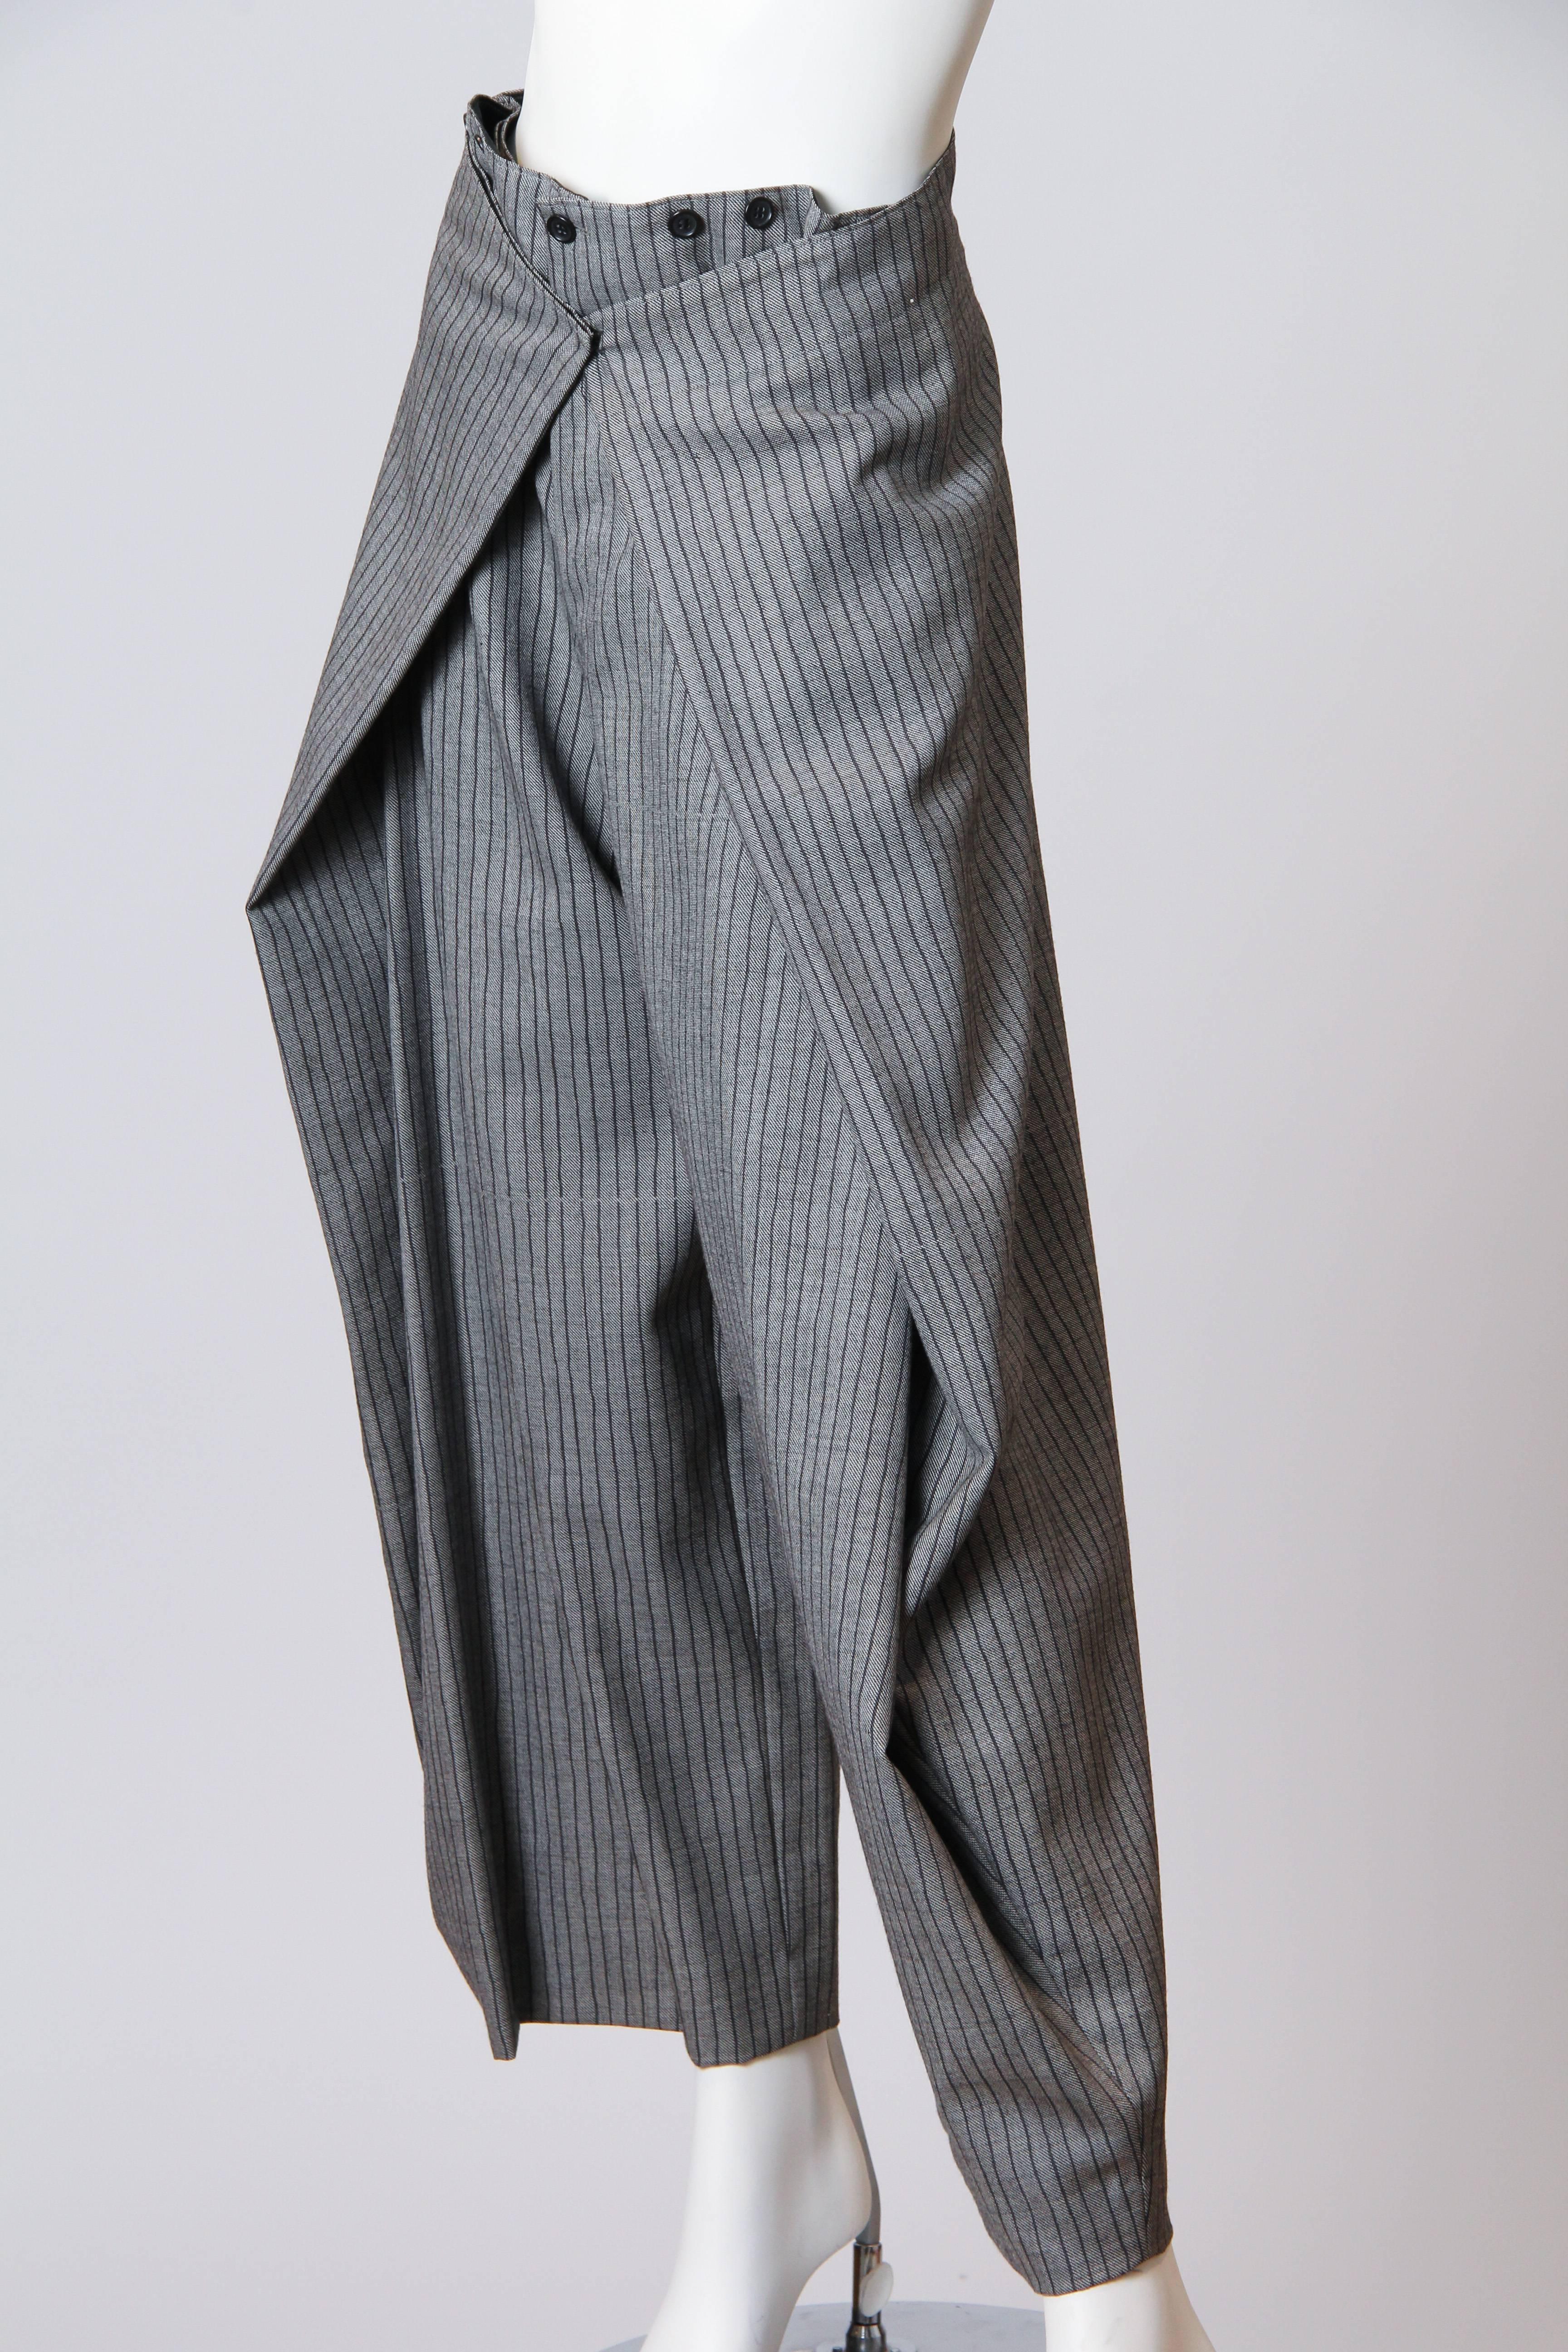 Jean Paul Gaultier Oragami Trousers In Excellent Condition In New York, NY